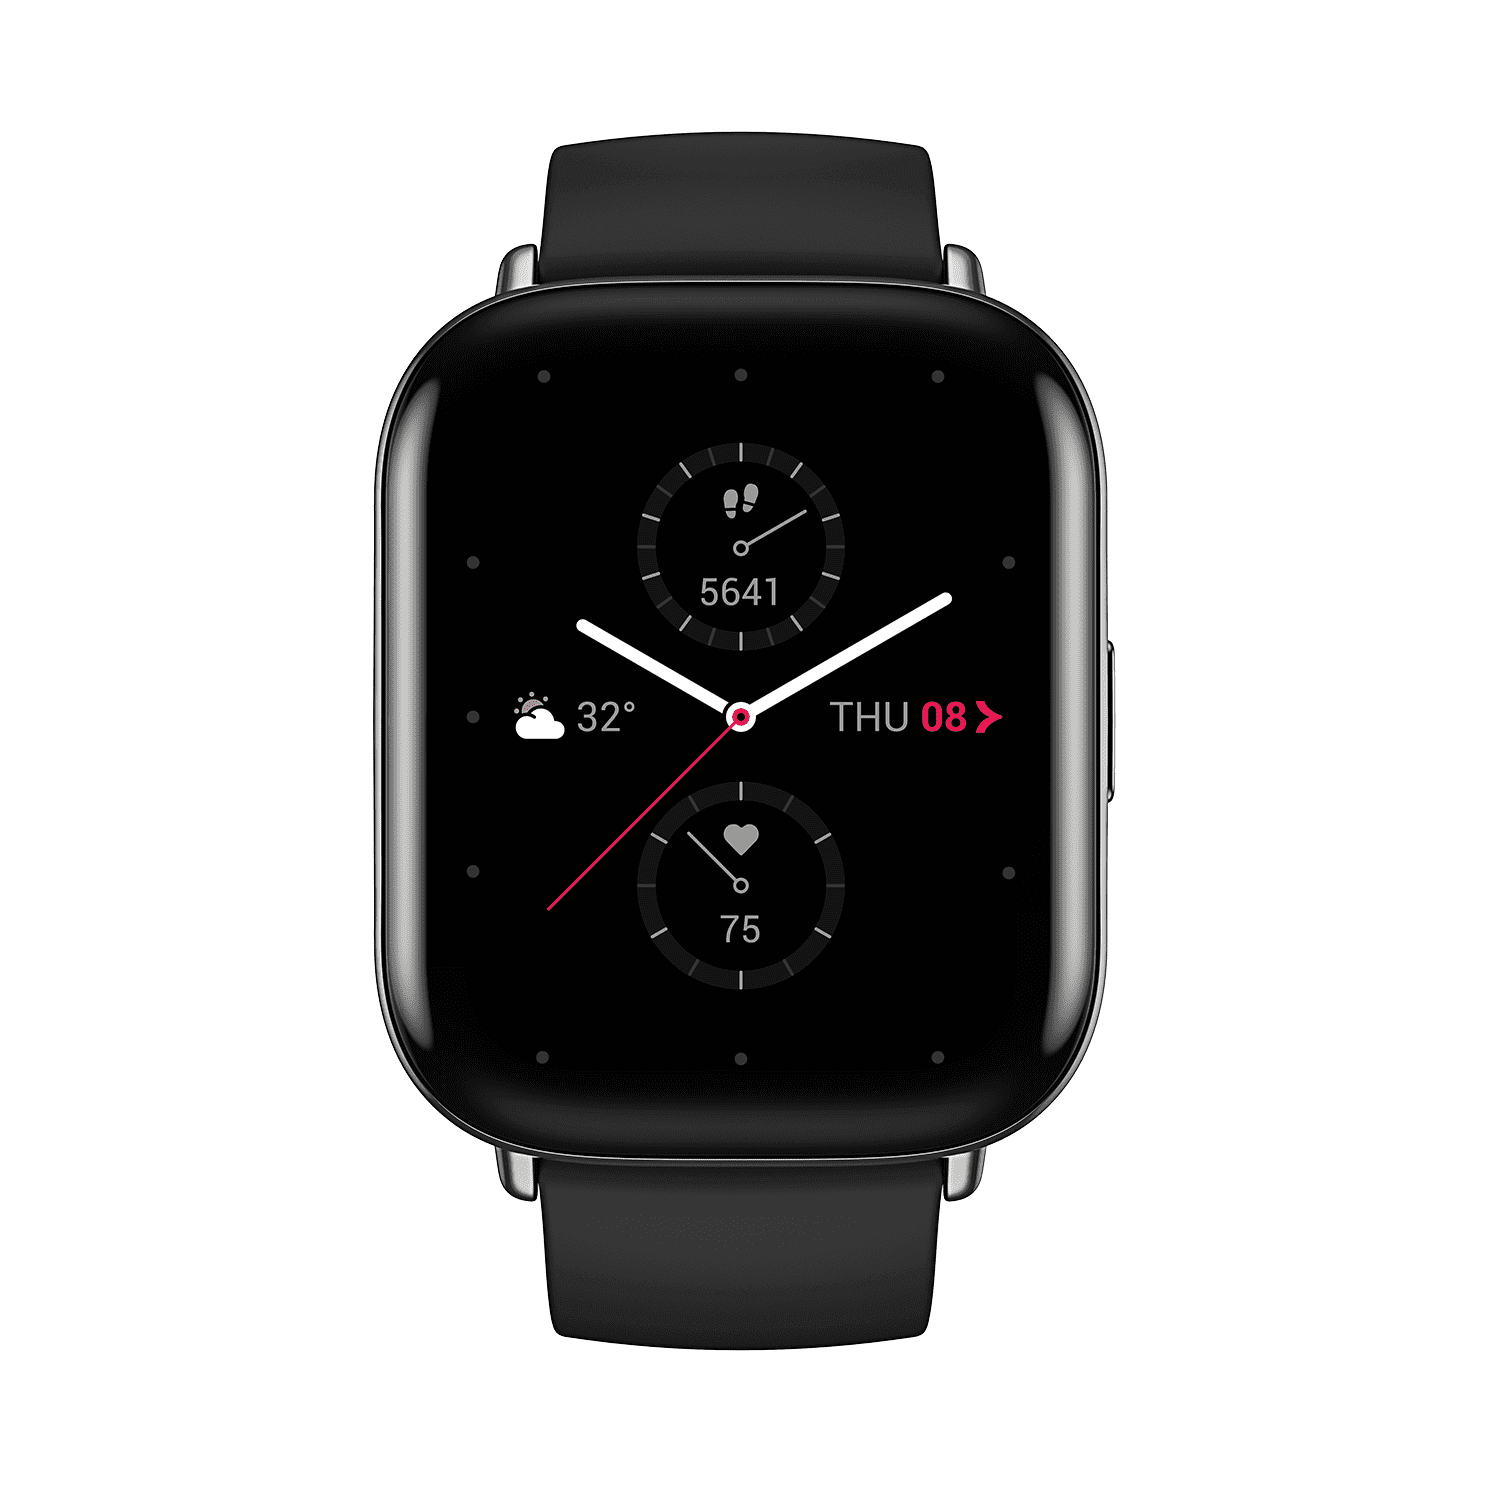 Amazfit GTS Review: Apple Watch Looks, But Not Apple Software